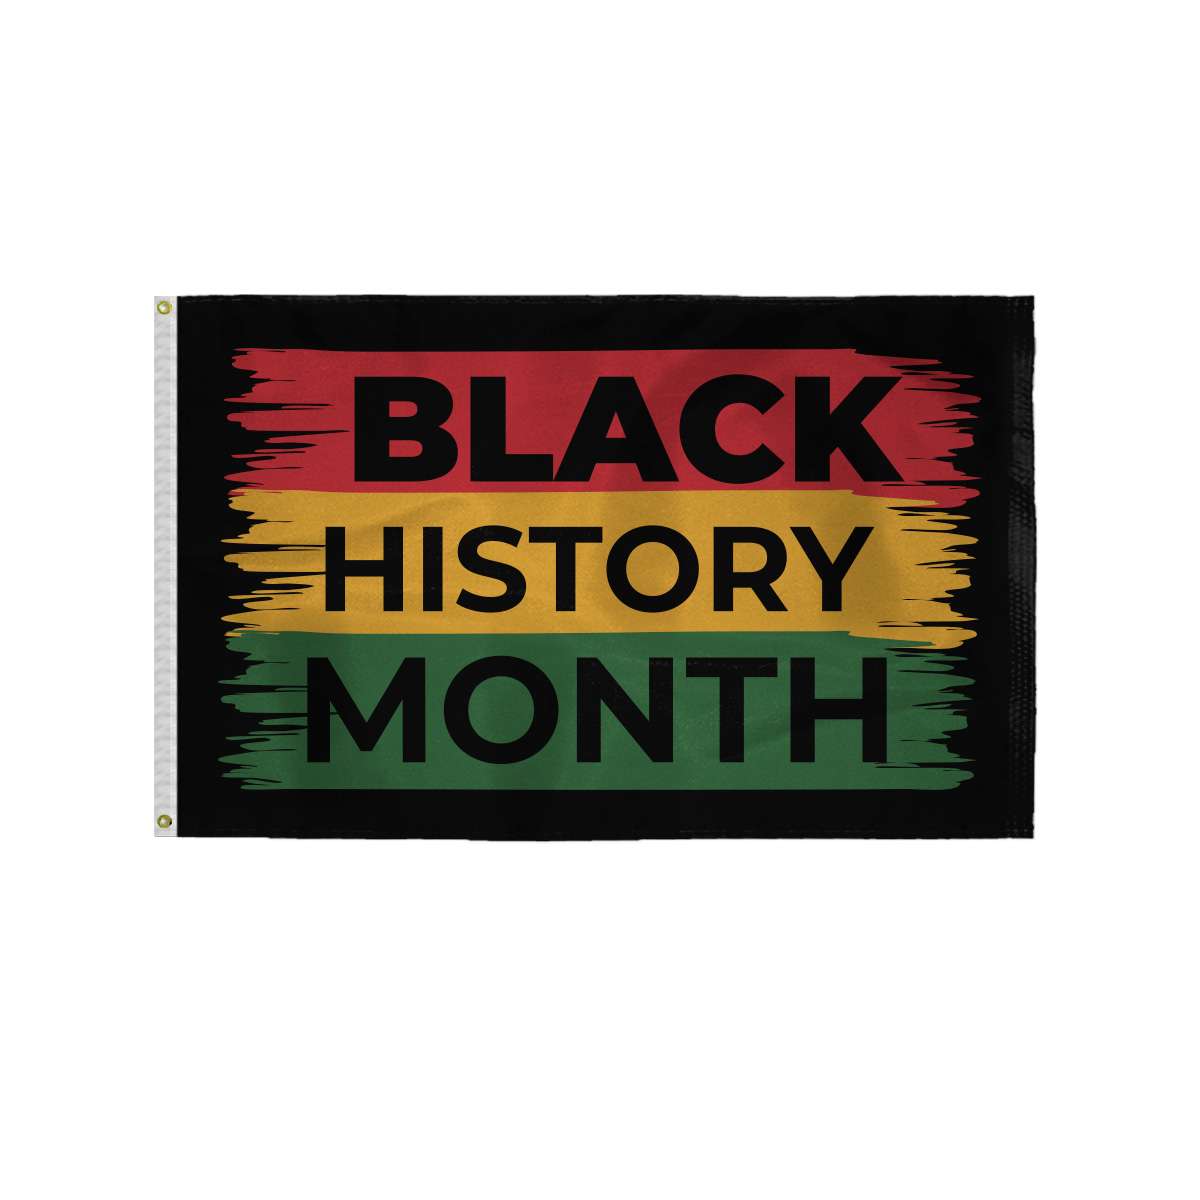 AGAS Black History Month Flag 3'x5' Ft- Black History Month Decorations